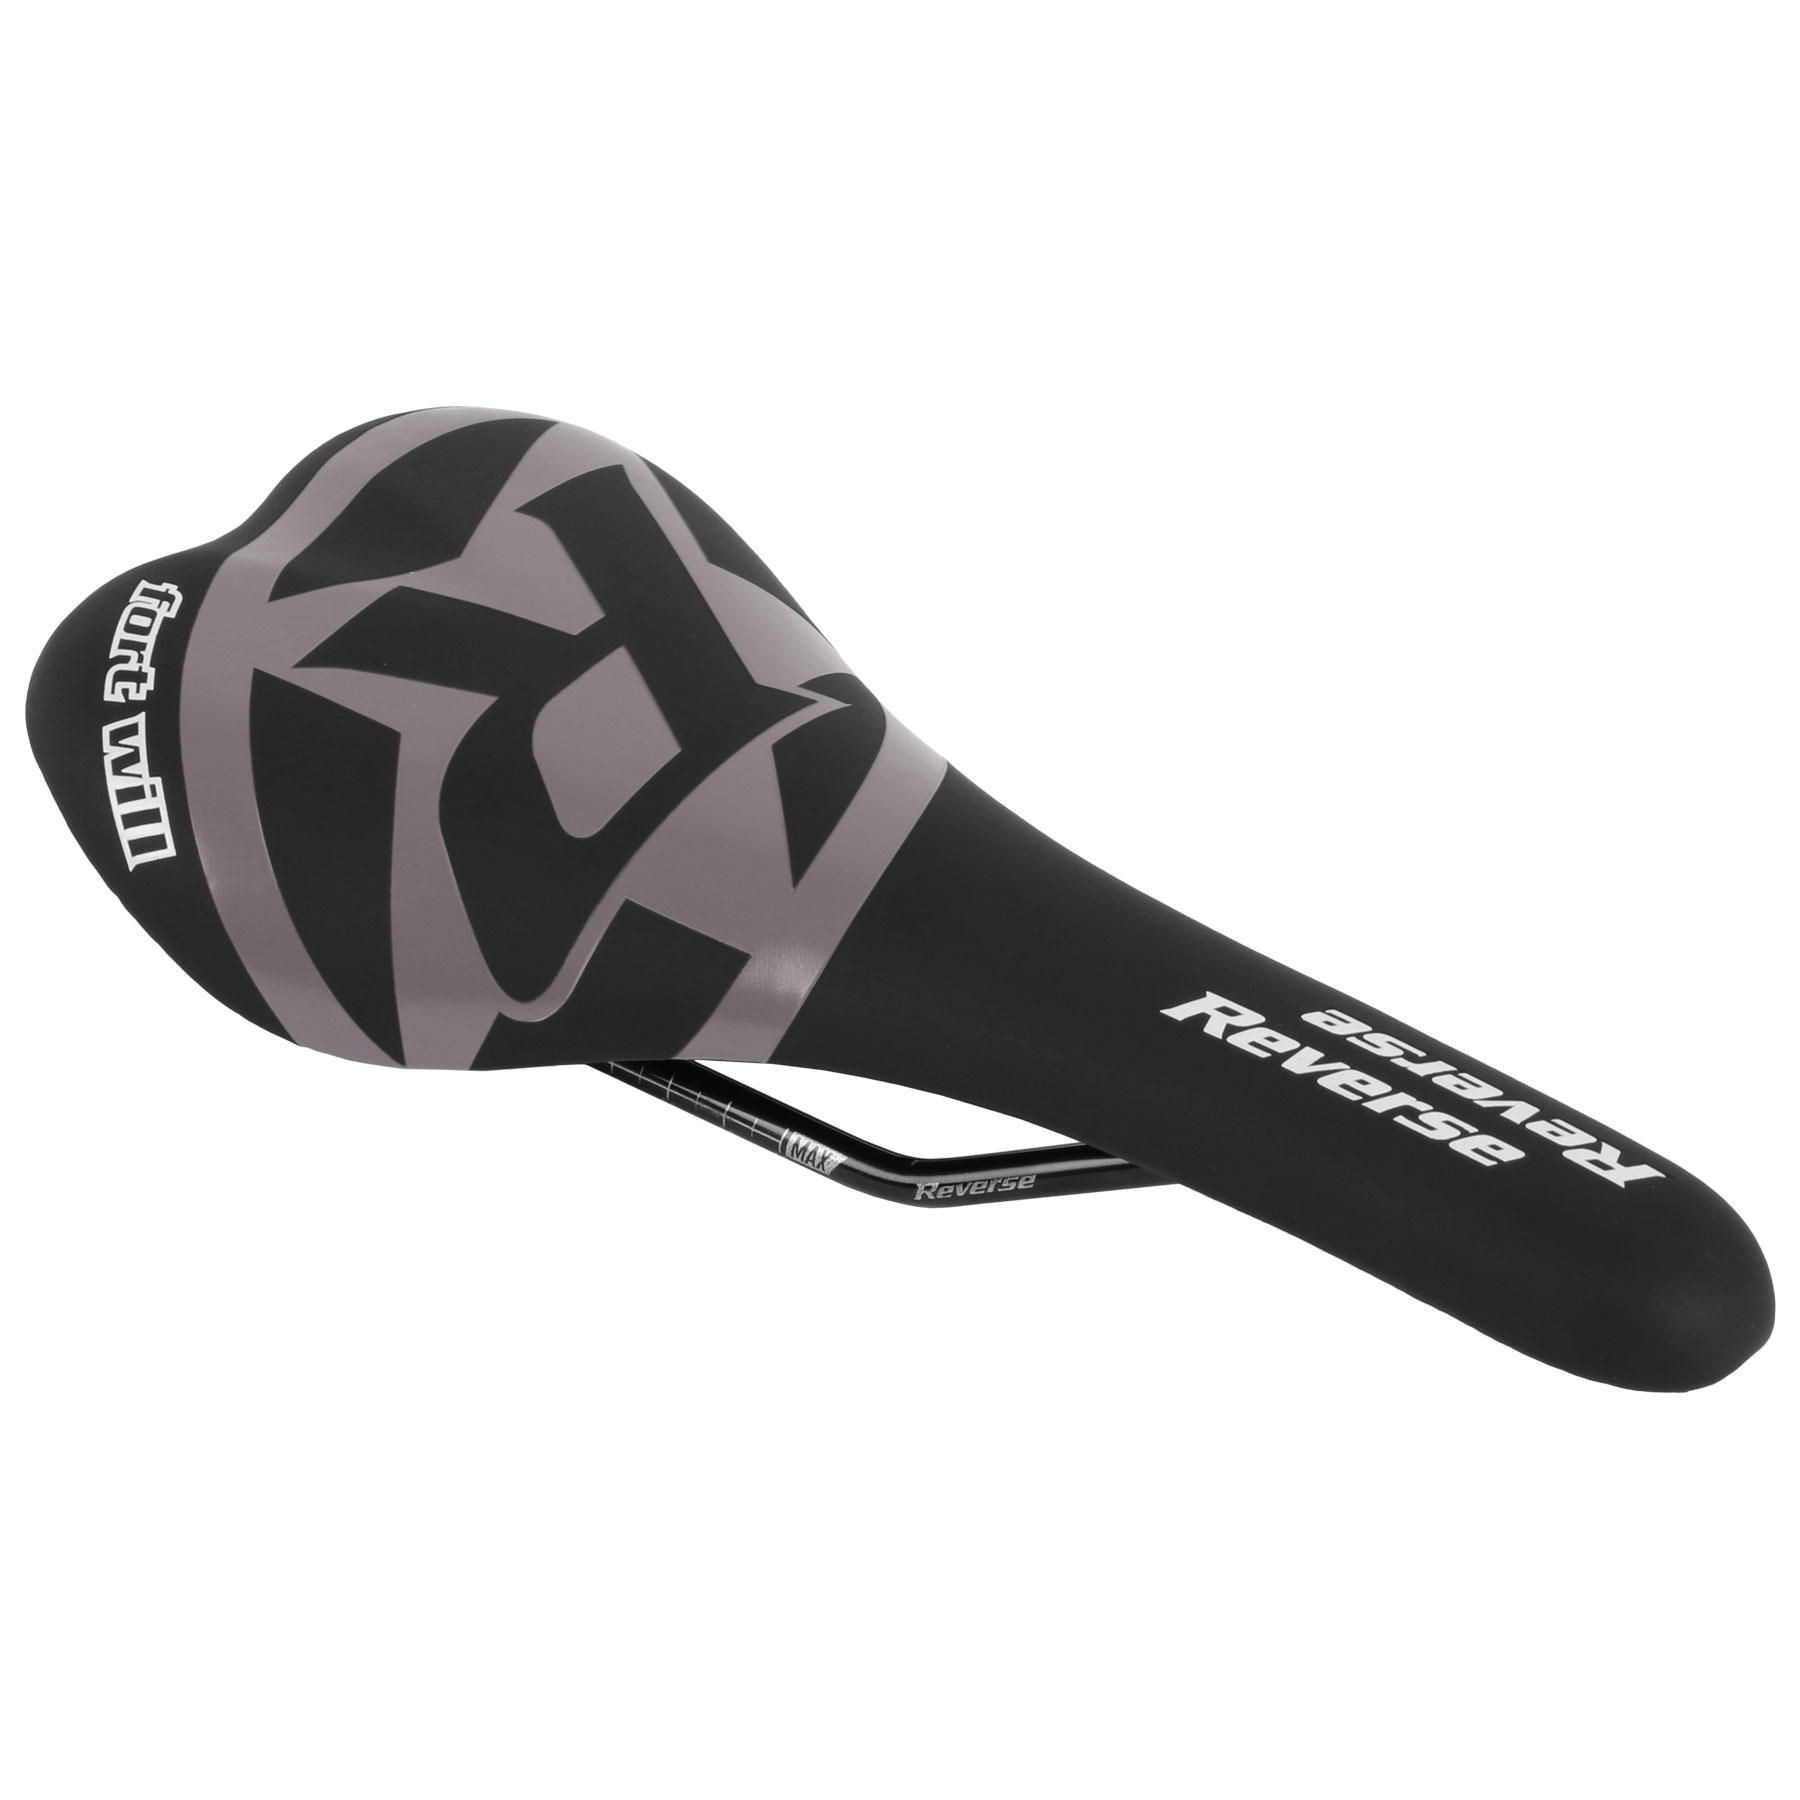 Productfoto van Reverse Components Fort Will Saddle CrMo Style - black / grey